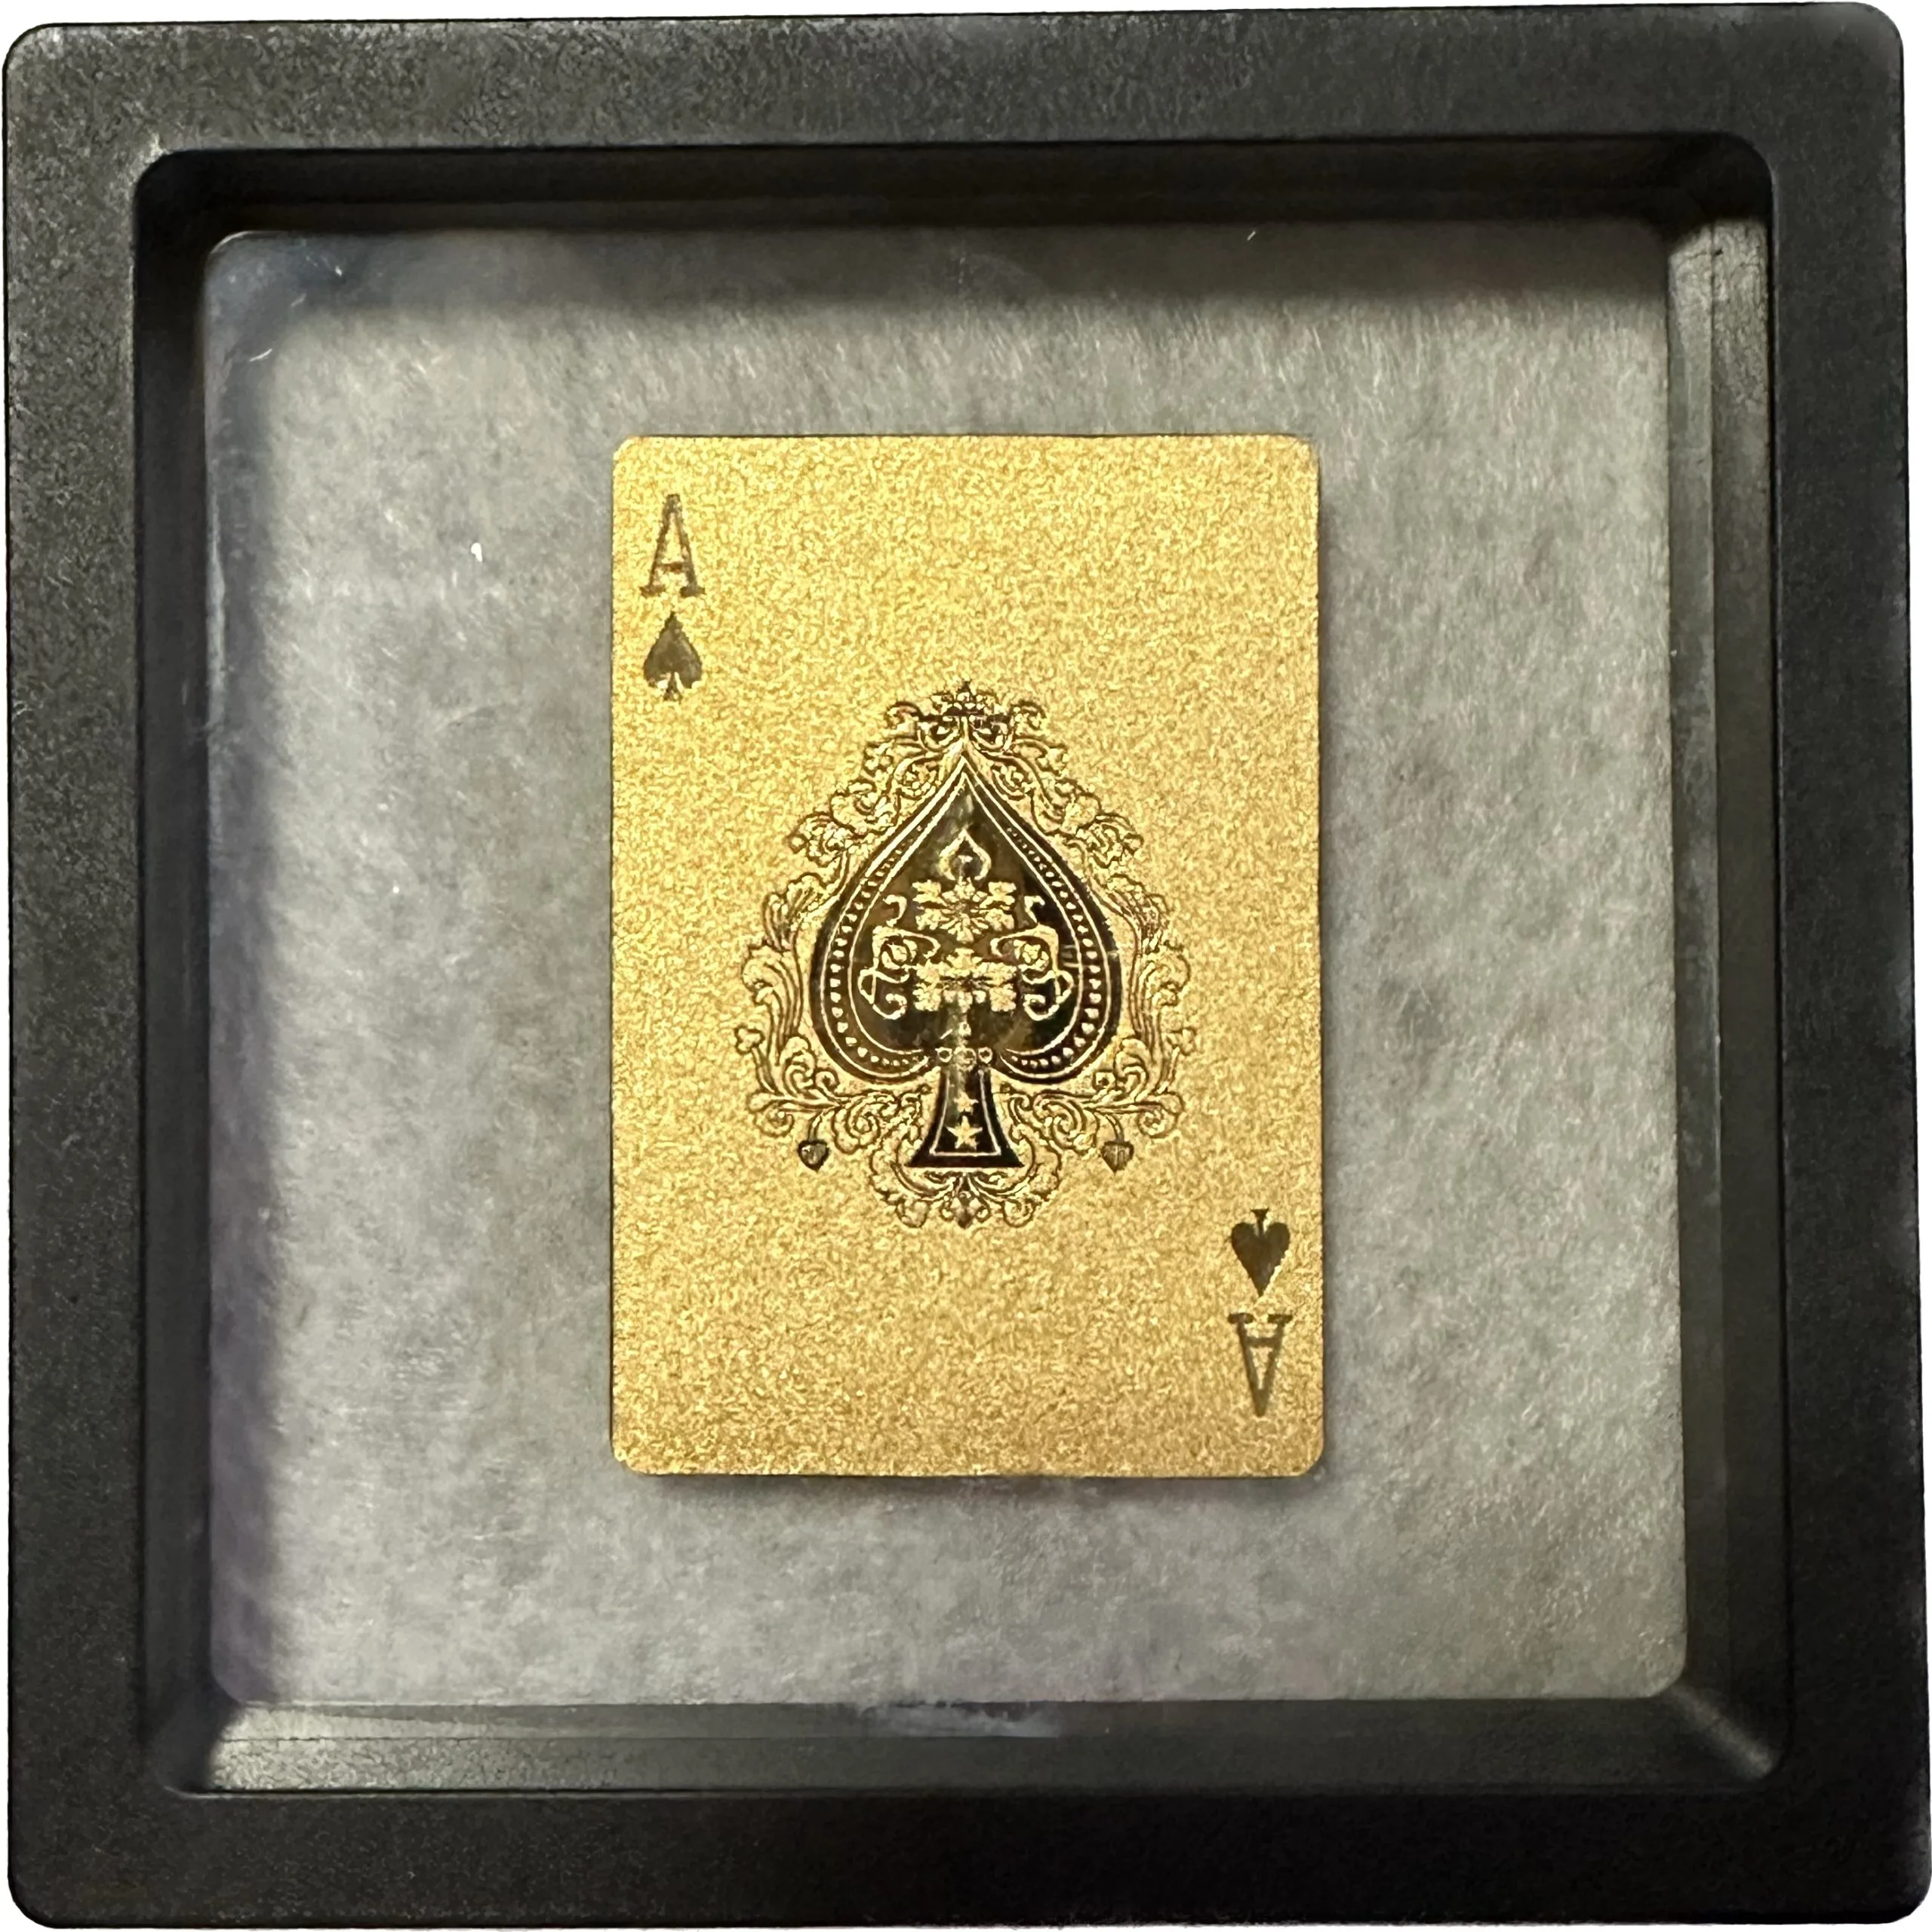 24k gold playing card,  One of a kind Prehistoric Online